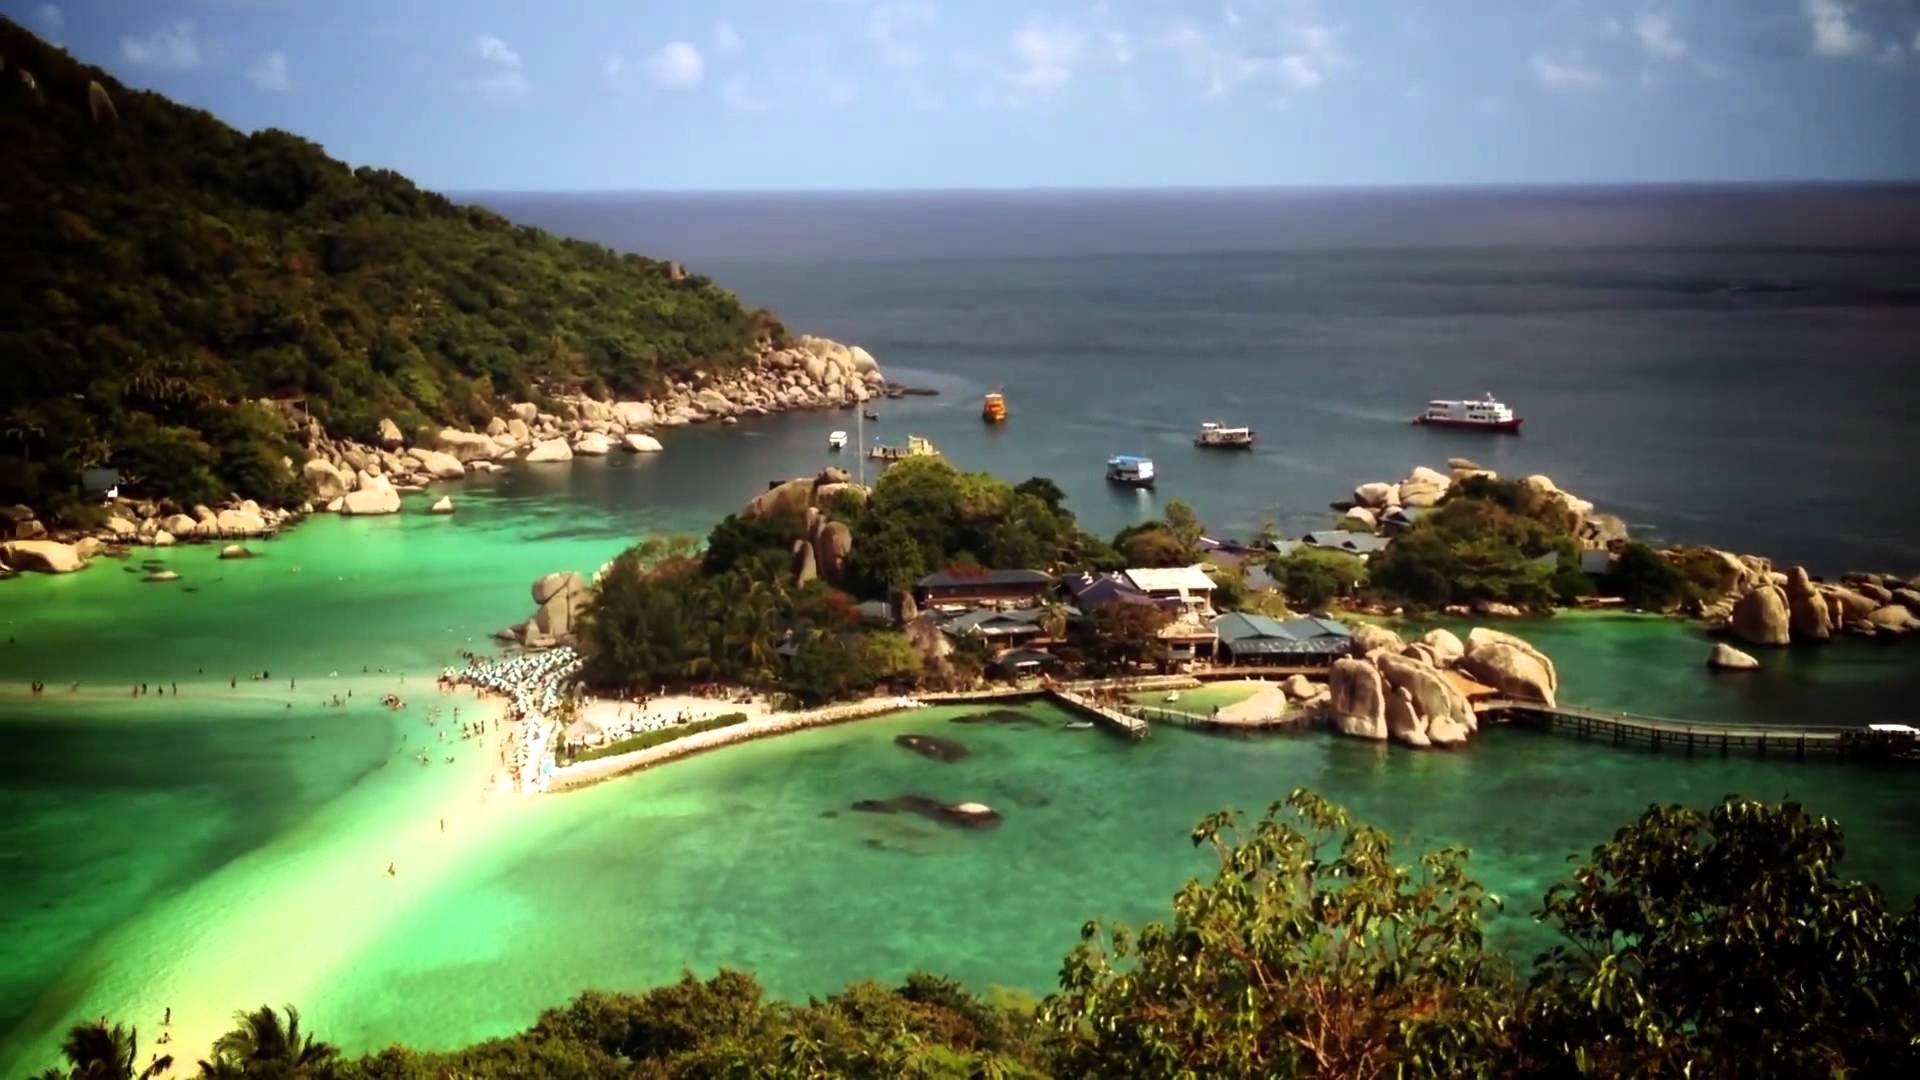 Beautiful Thailand Travel Film Shot with iPhone 4s - YouTube